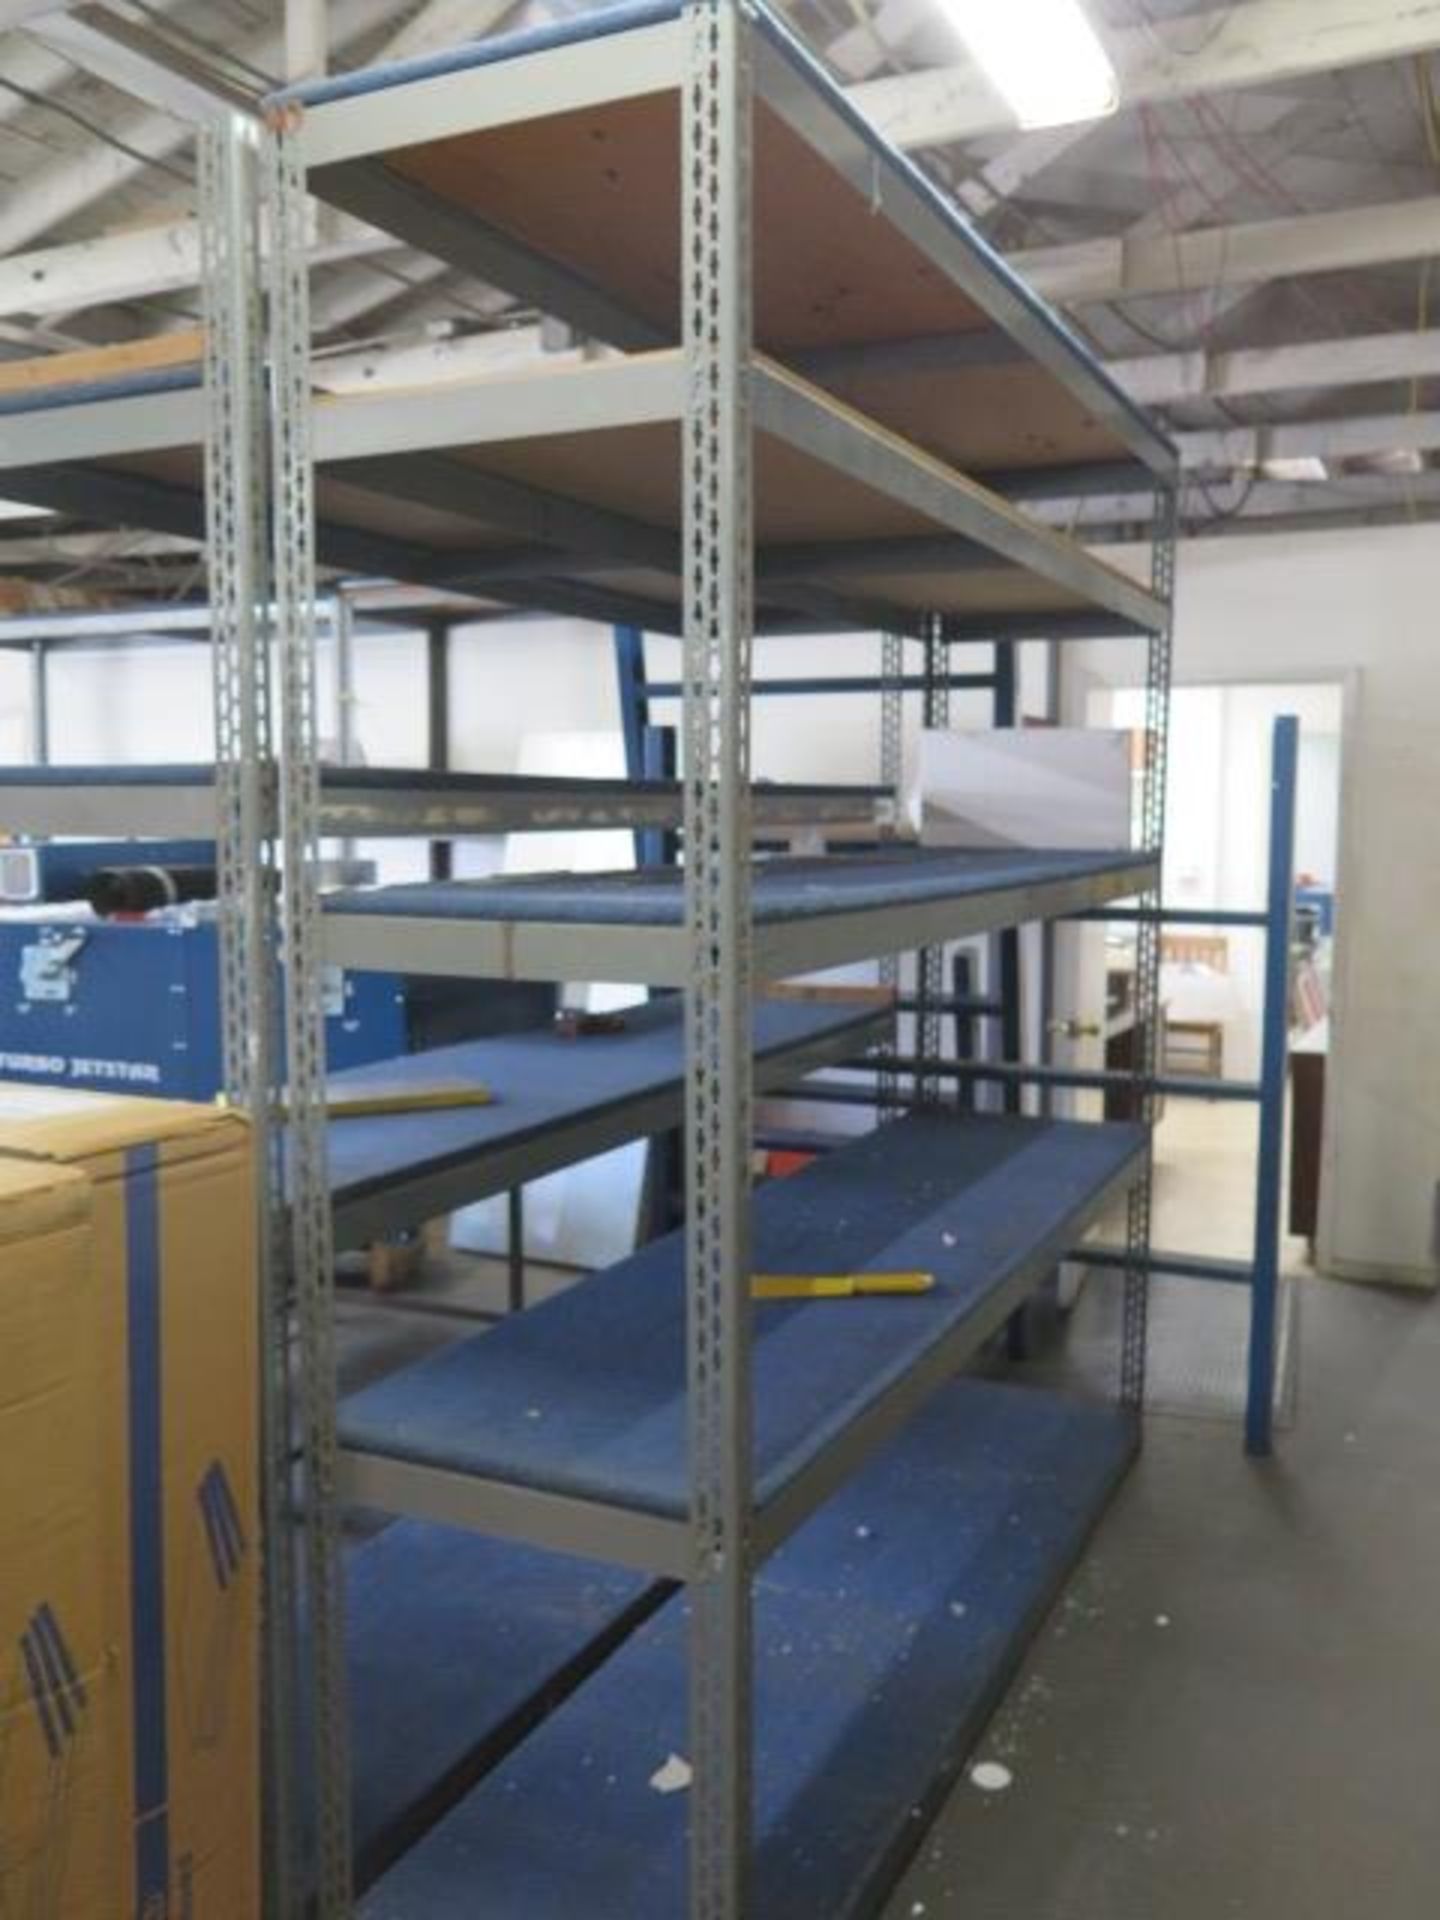 Shelving and Racks (SOLD AS-IS - NO WARRANTY)